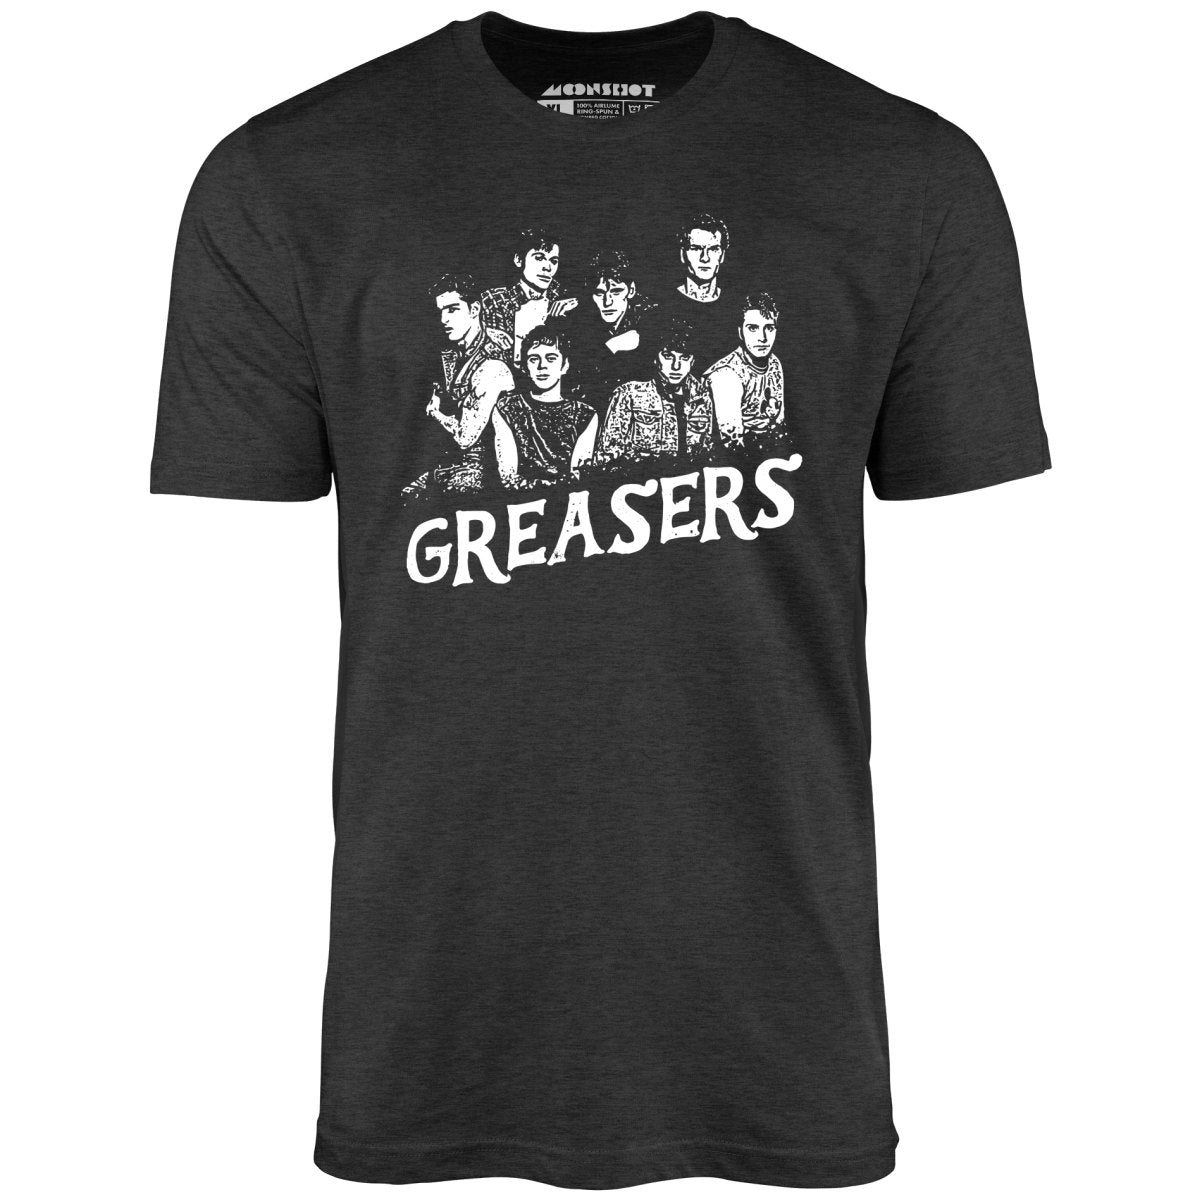 Greasers - Unisex T-Shirt